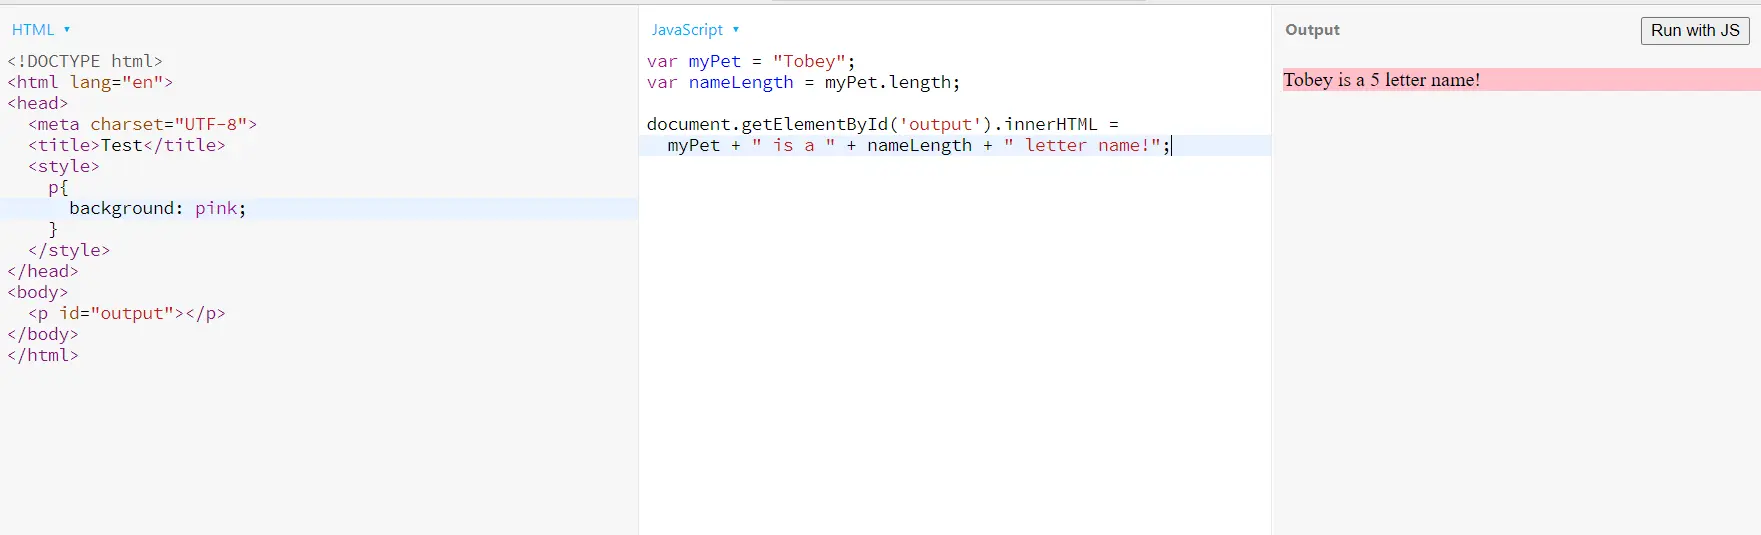 user defined js variable in html